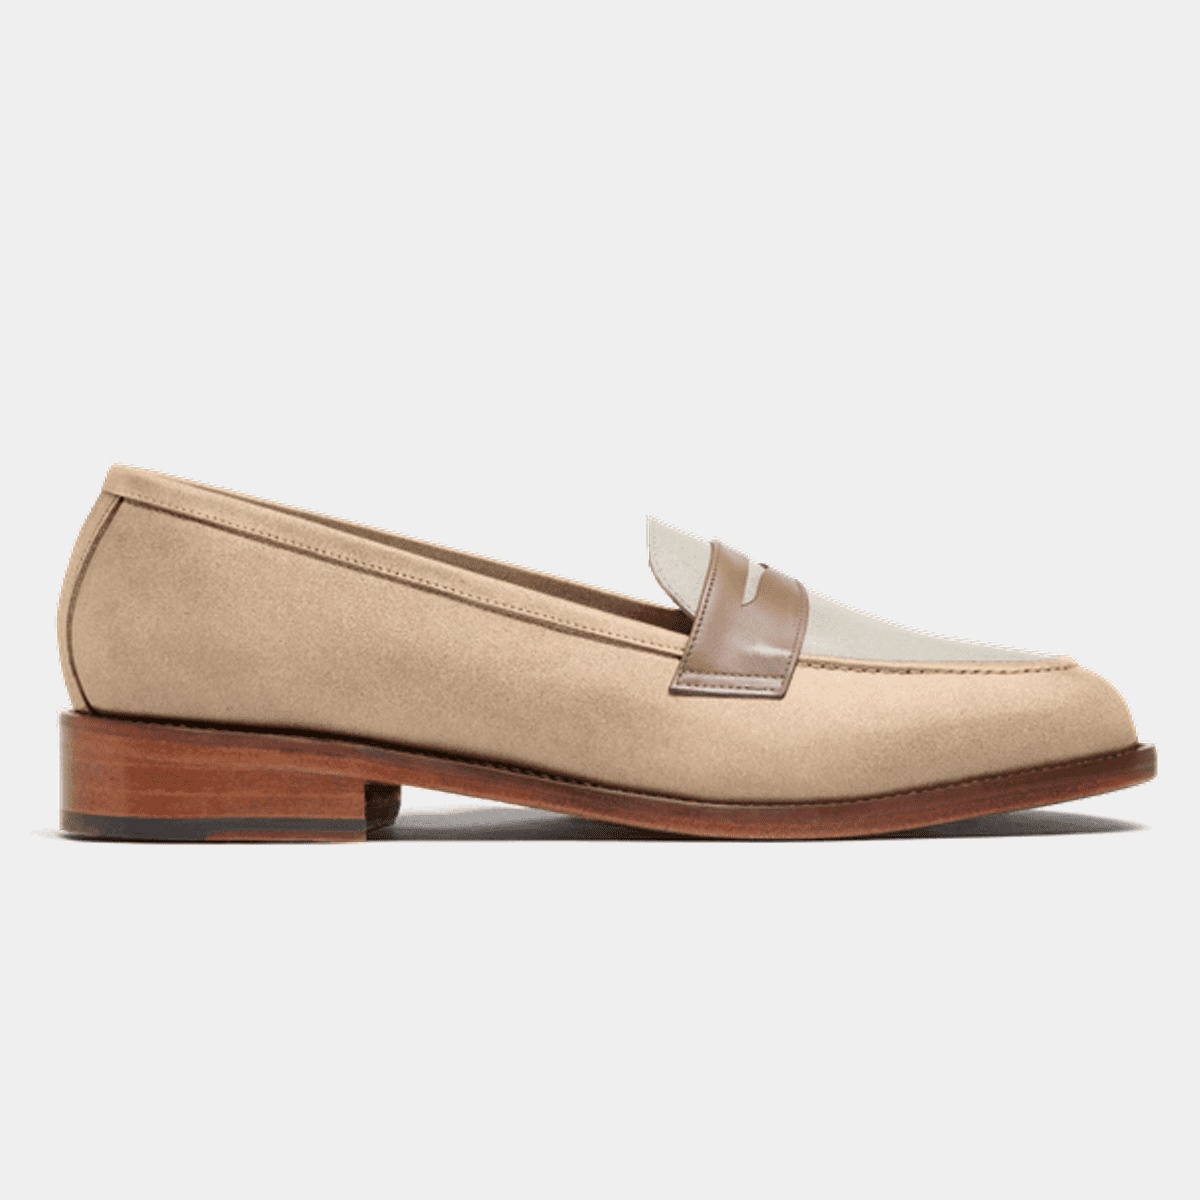 Penny Loafers - brown suede